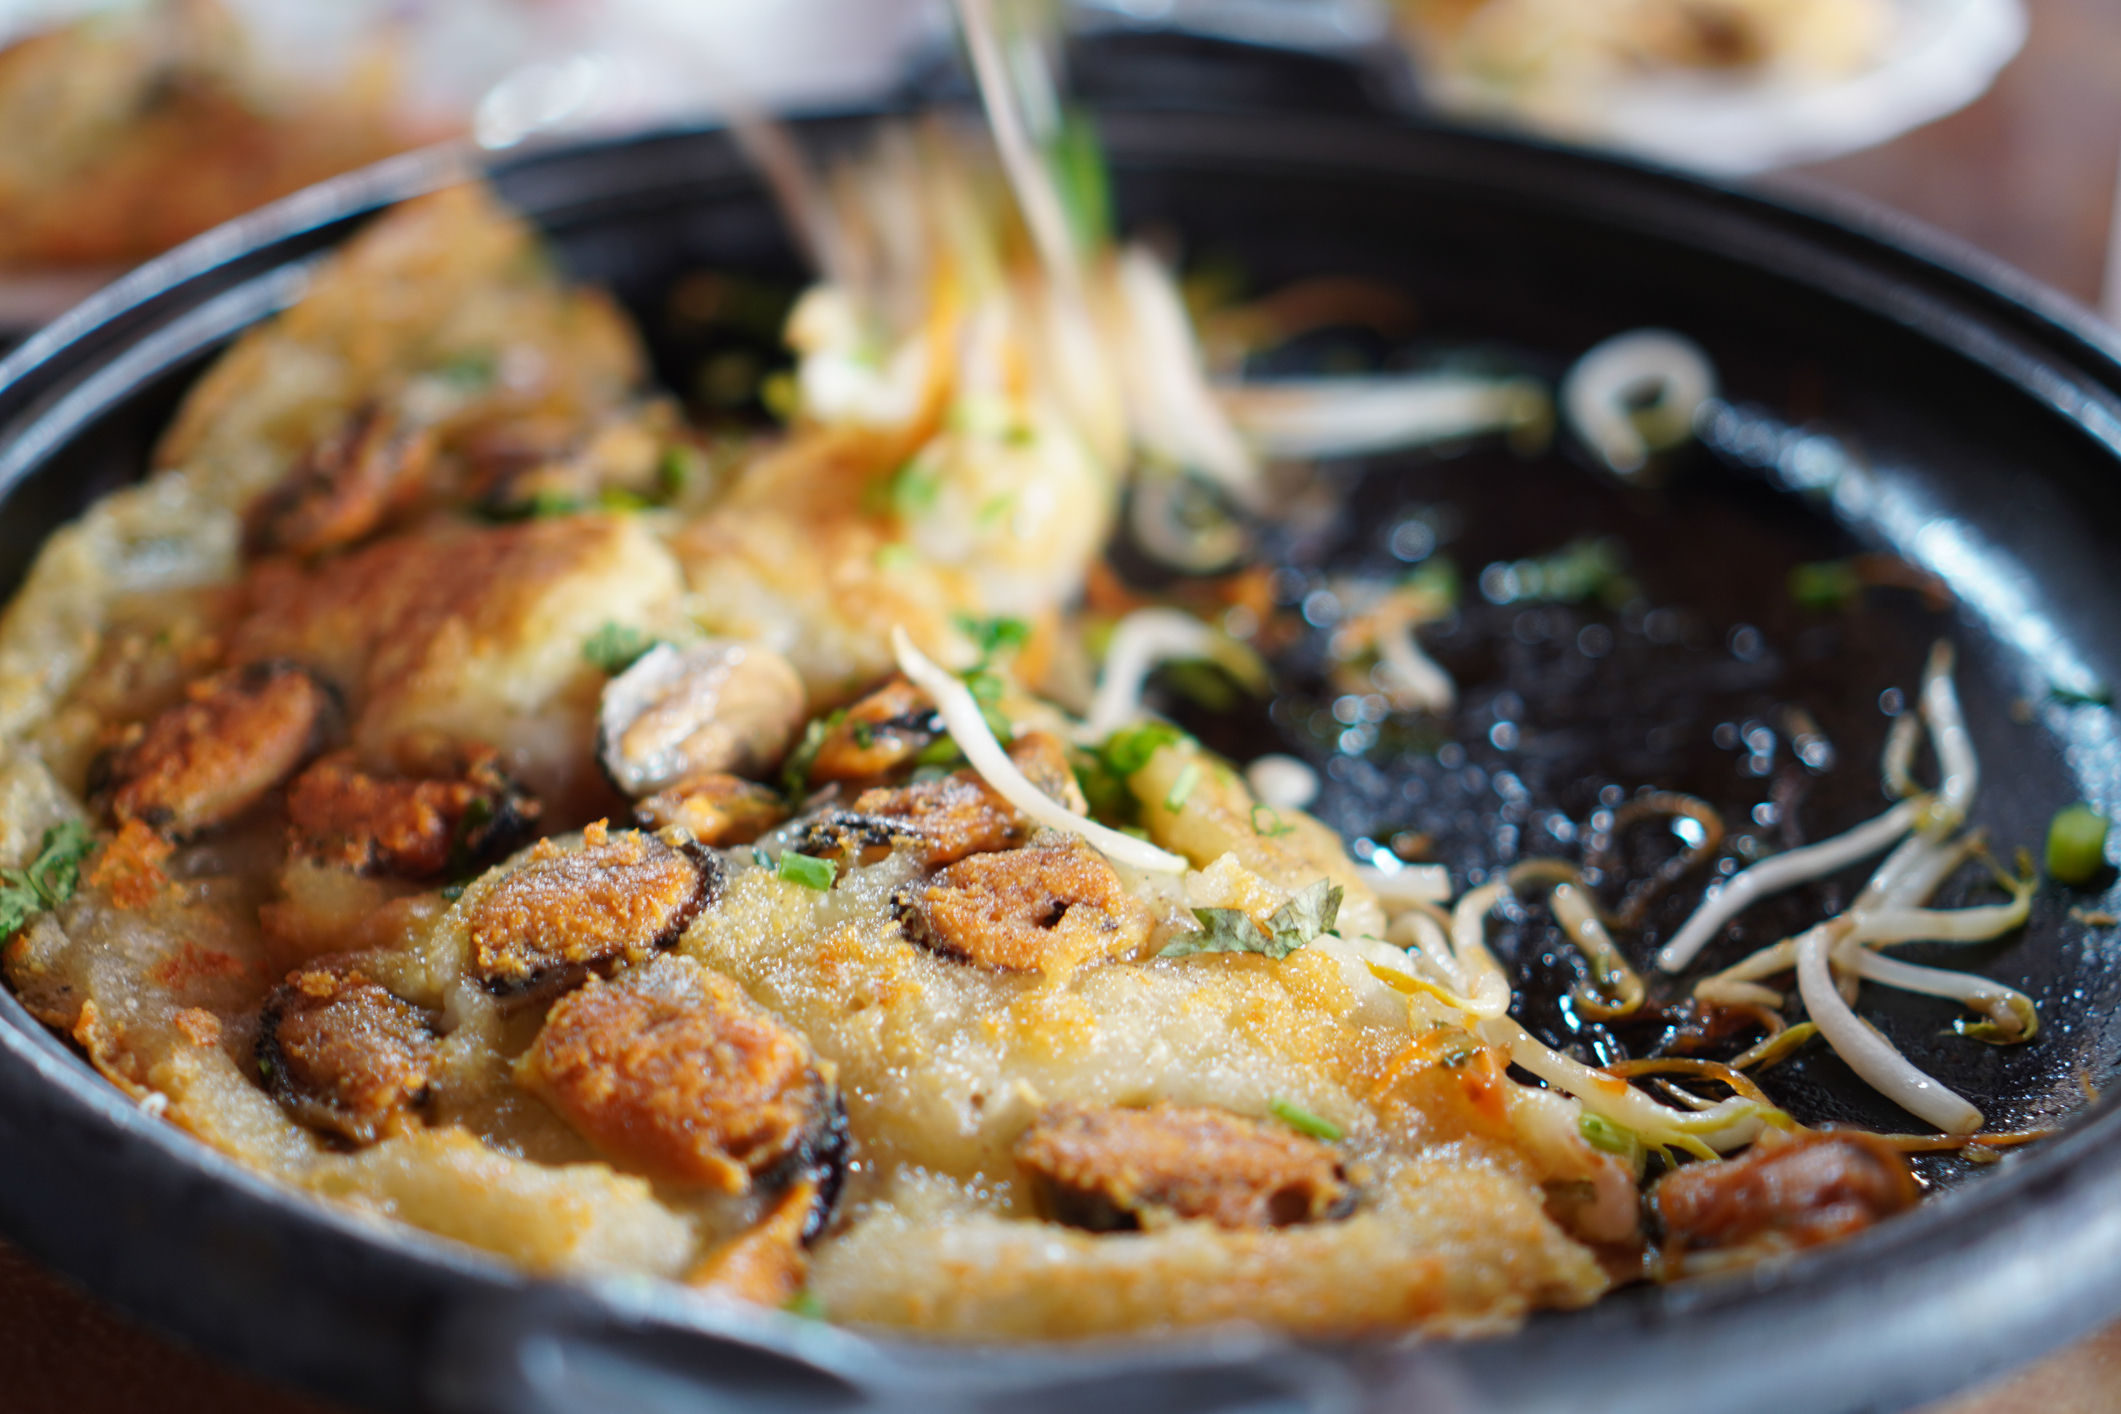 Sizzling plate of Korean seafood pancake with side toppings ready to be served